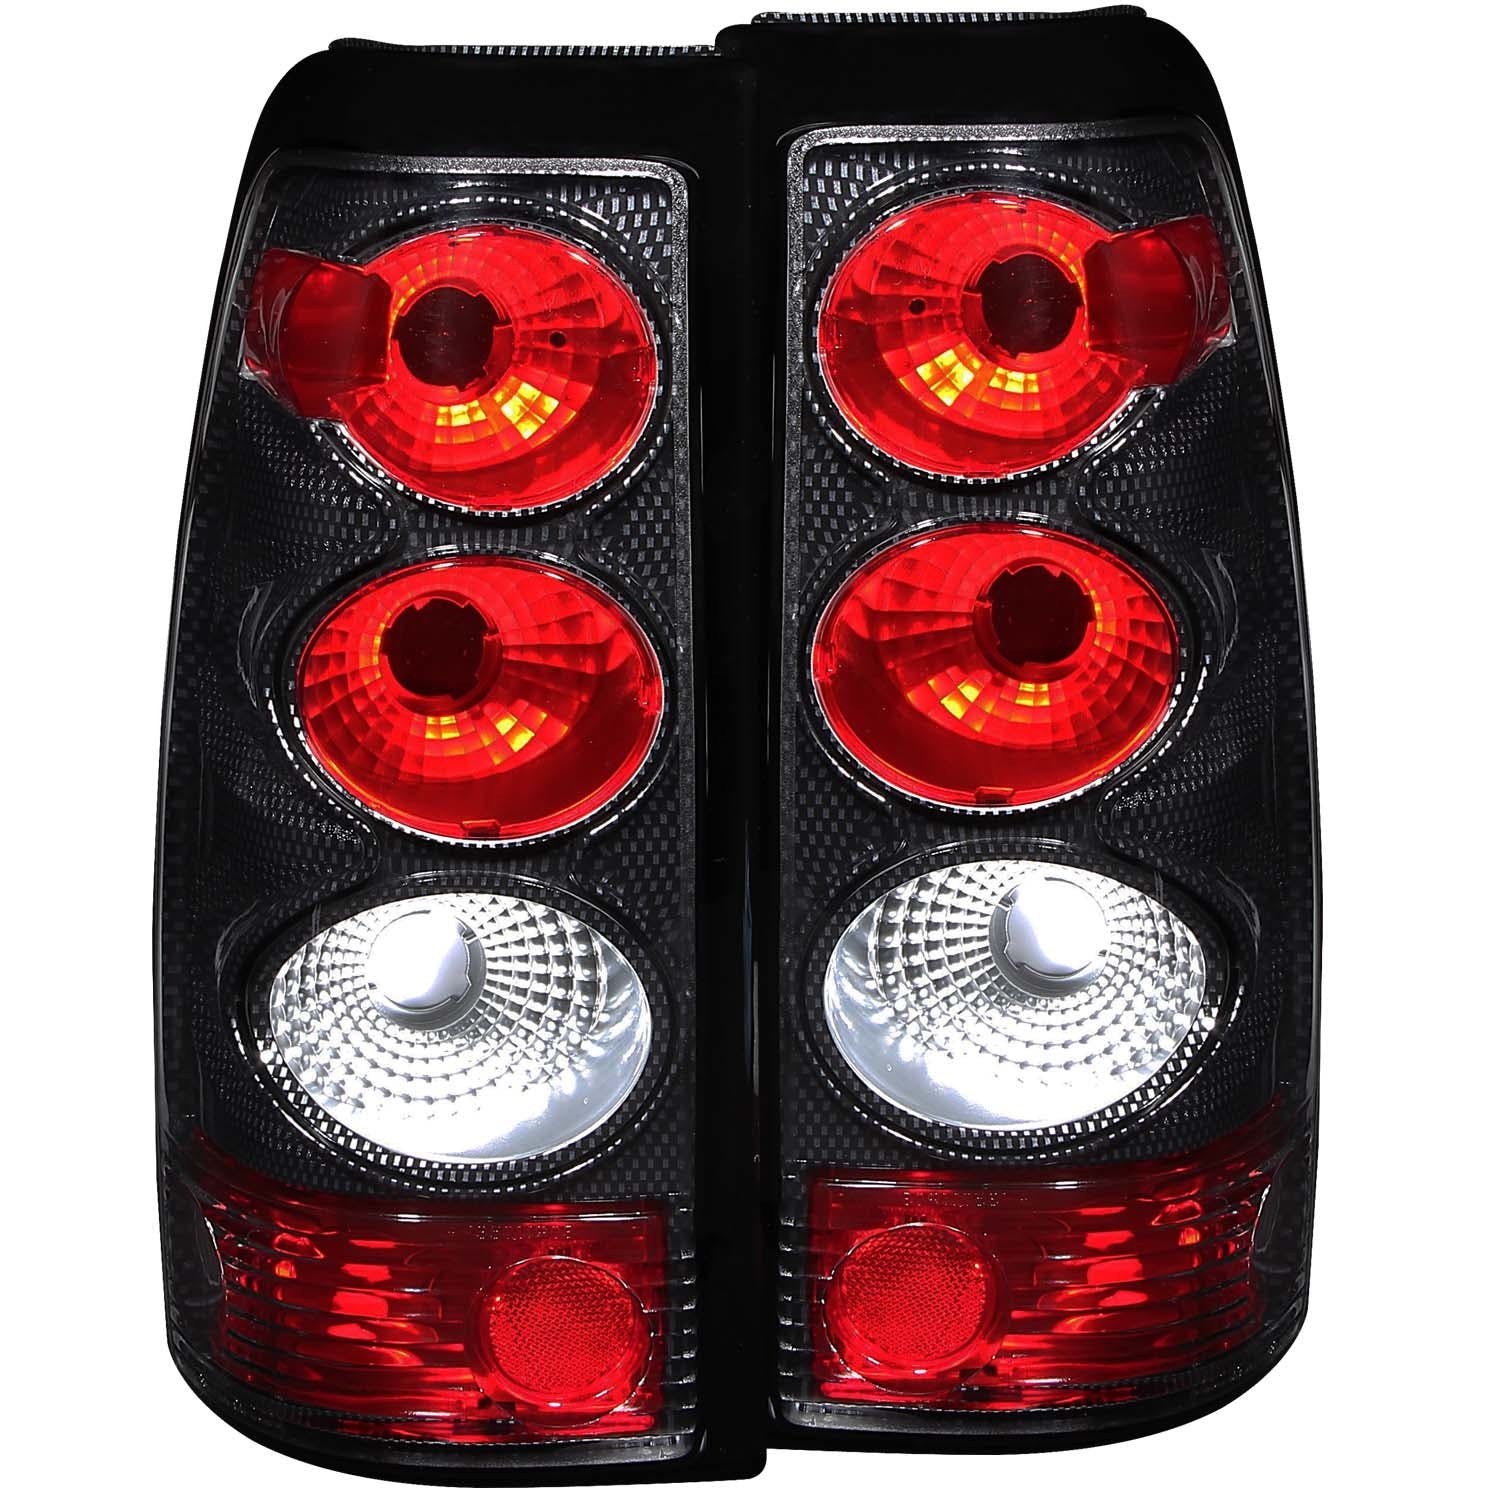 AnzoUSA 211021 Taillights Carbon